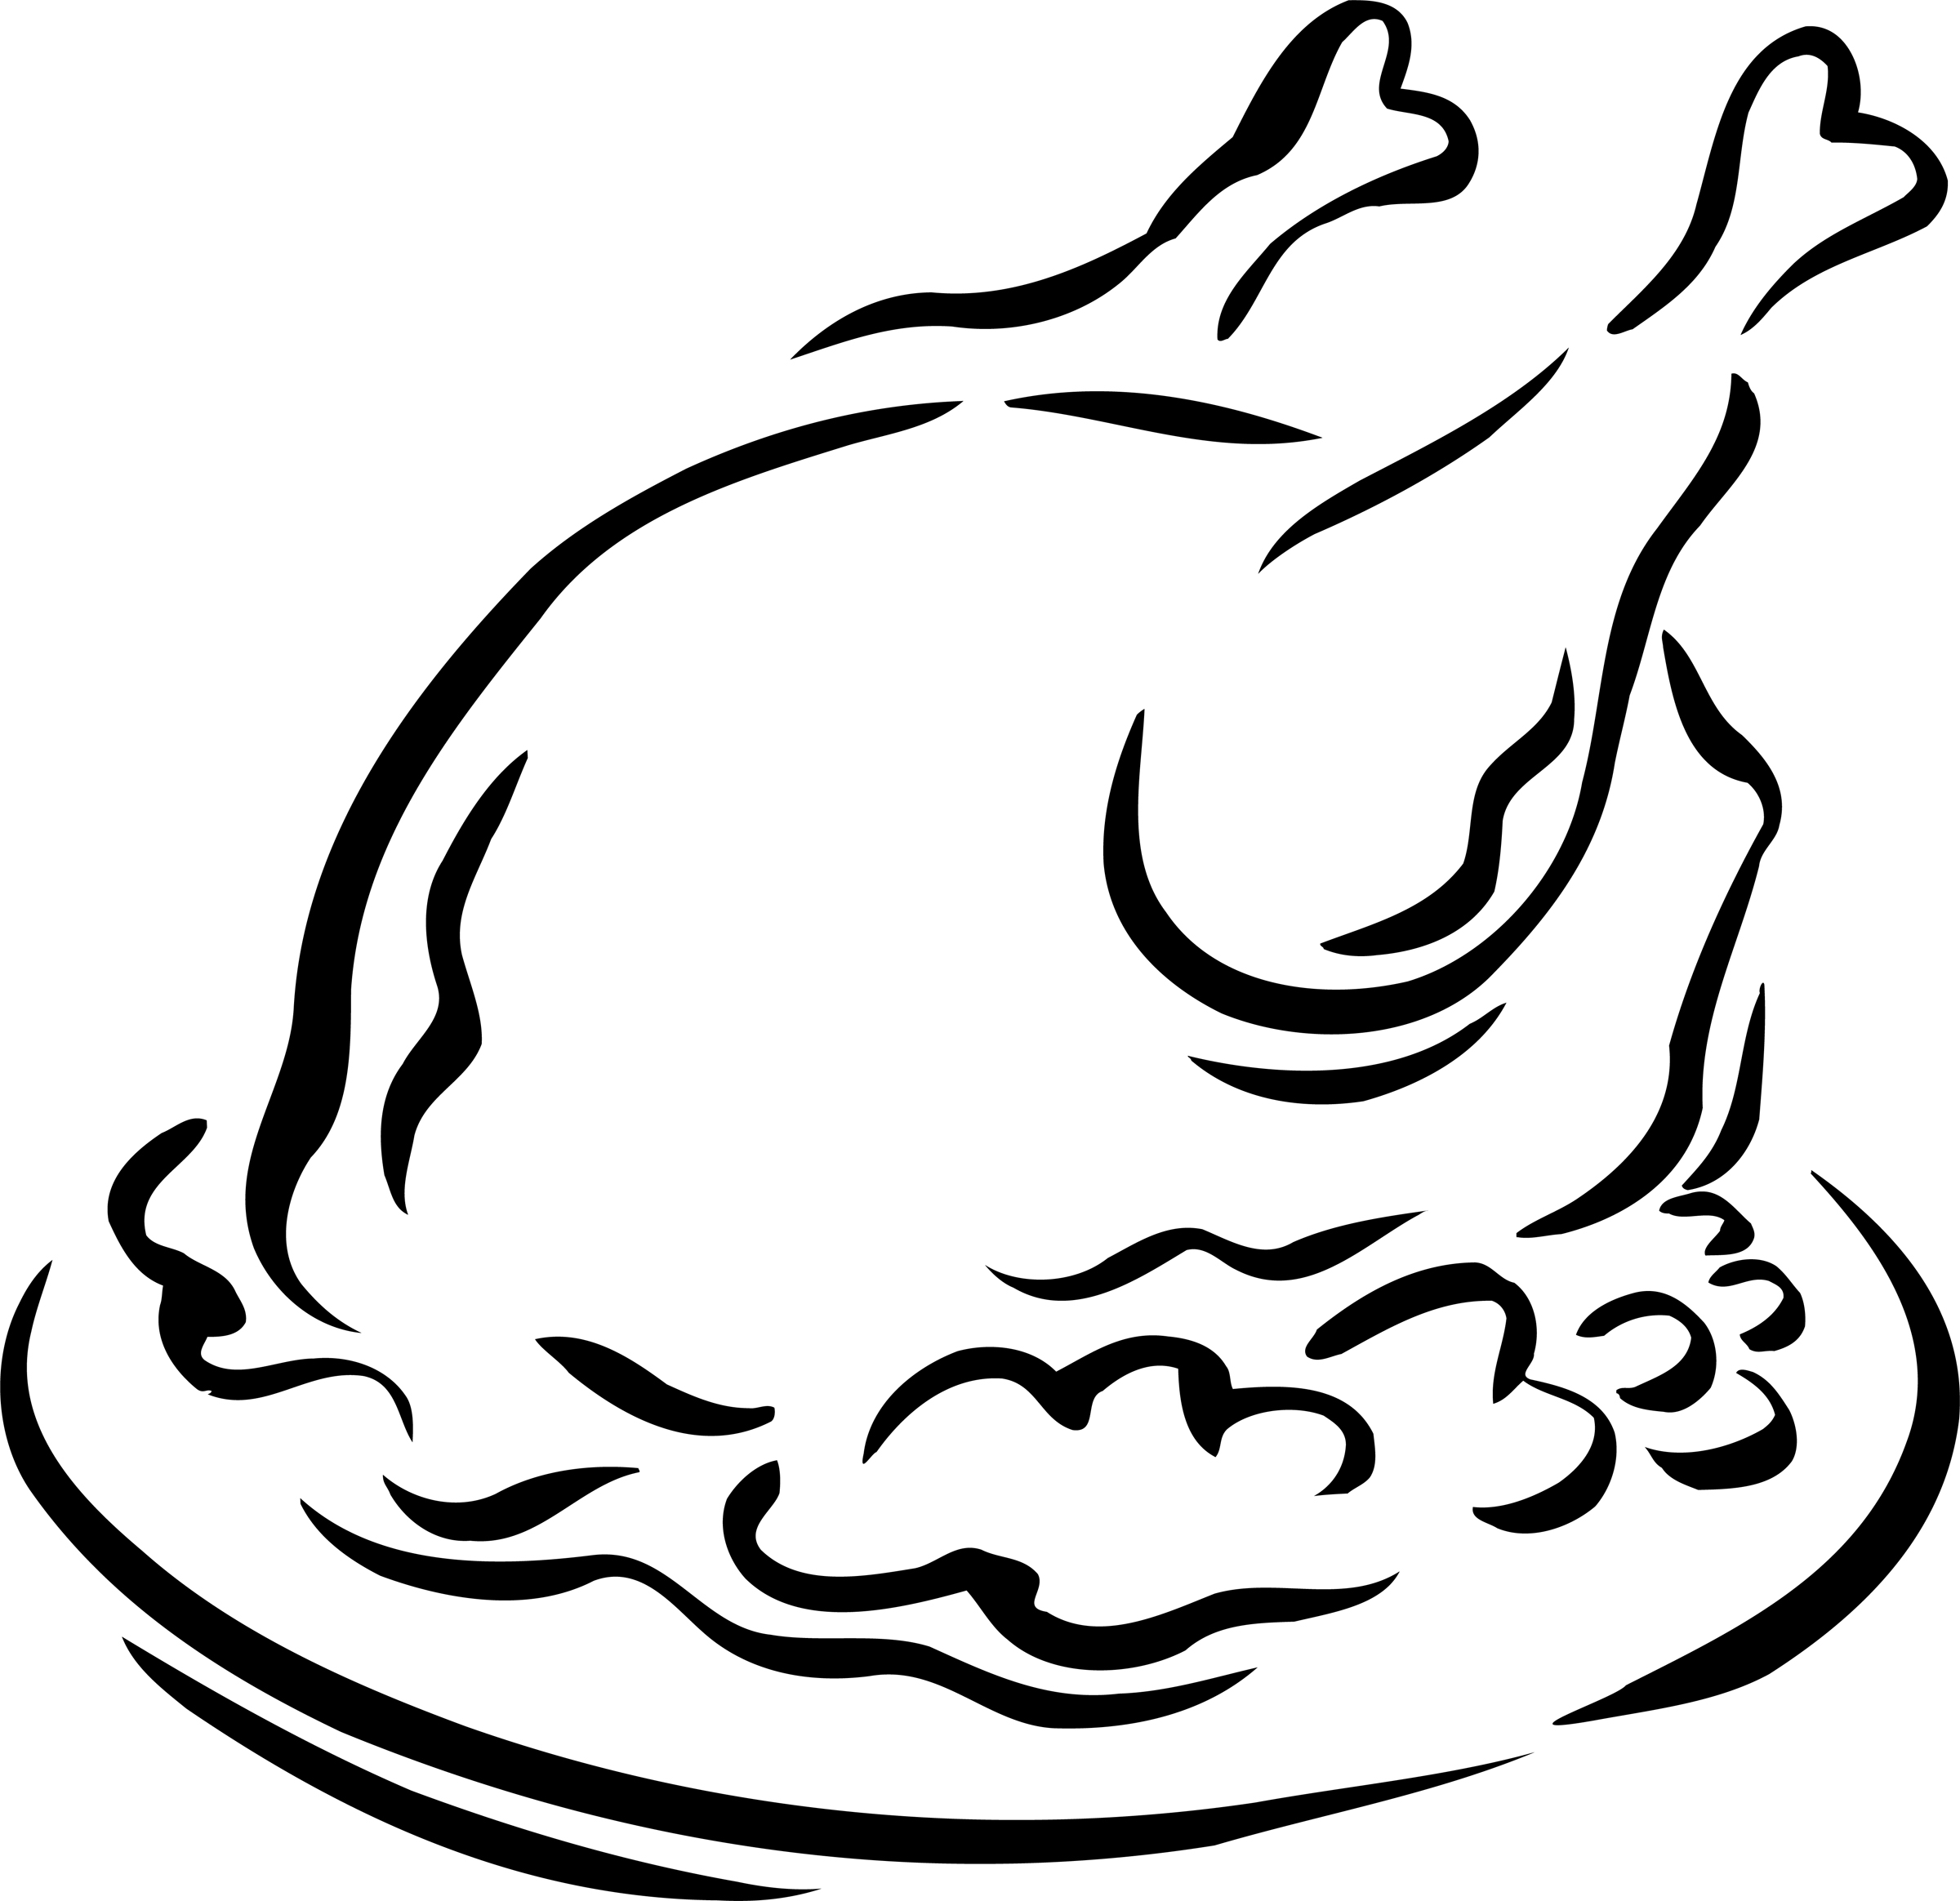 Turkey  black and white cooked turkey clipart black and white clipartfox 2